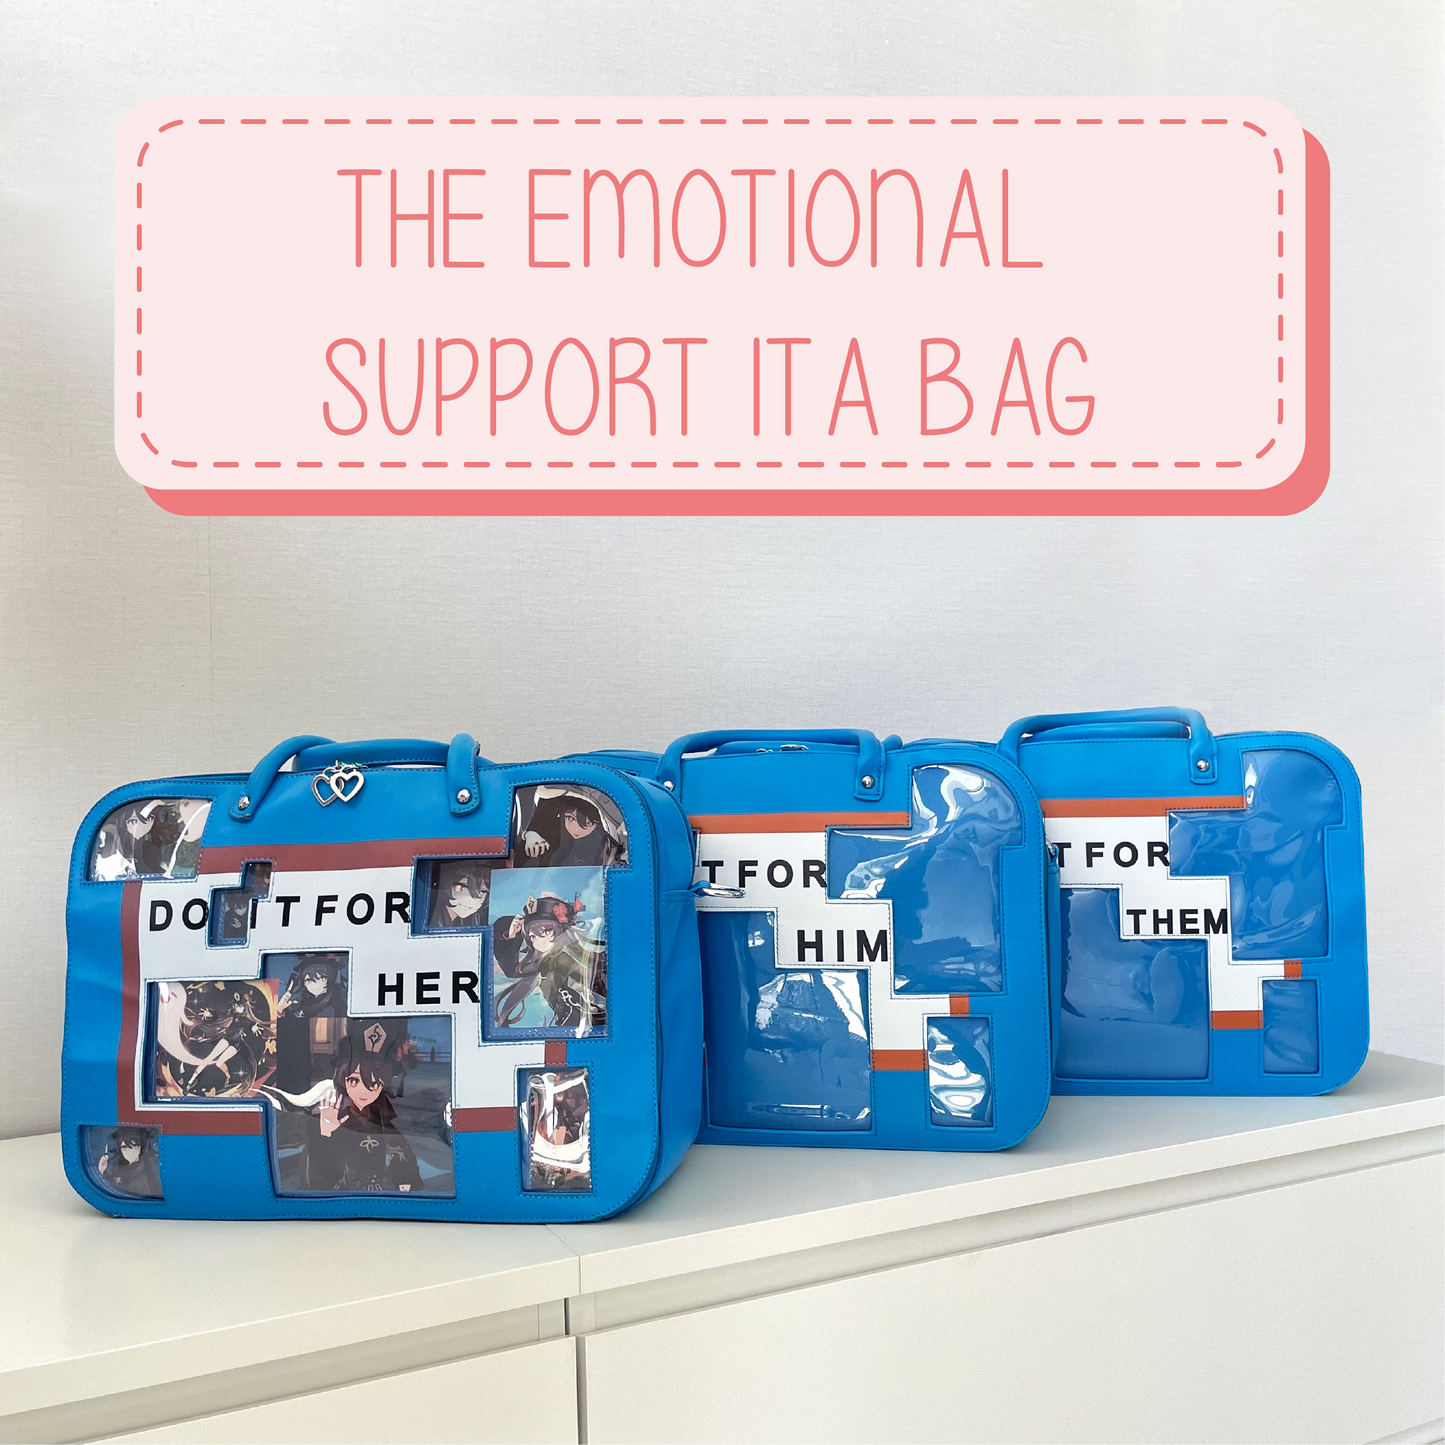 THE EMOTIONAL SUPPORT ITA BAG